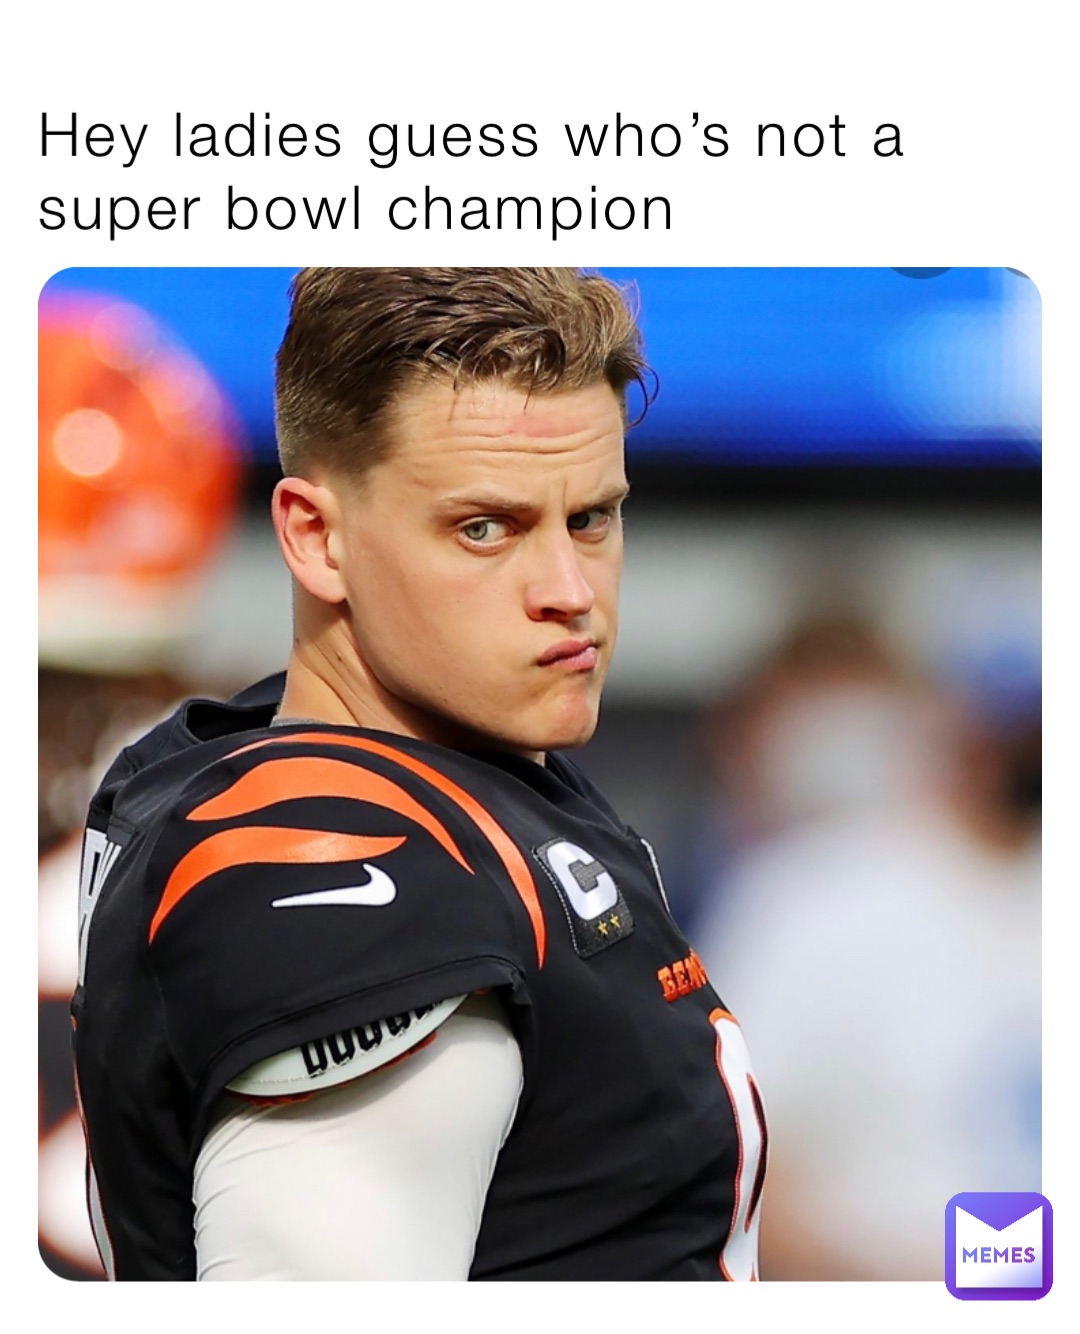 Hey ladies guess who’s not a super bowl champion